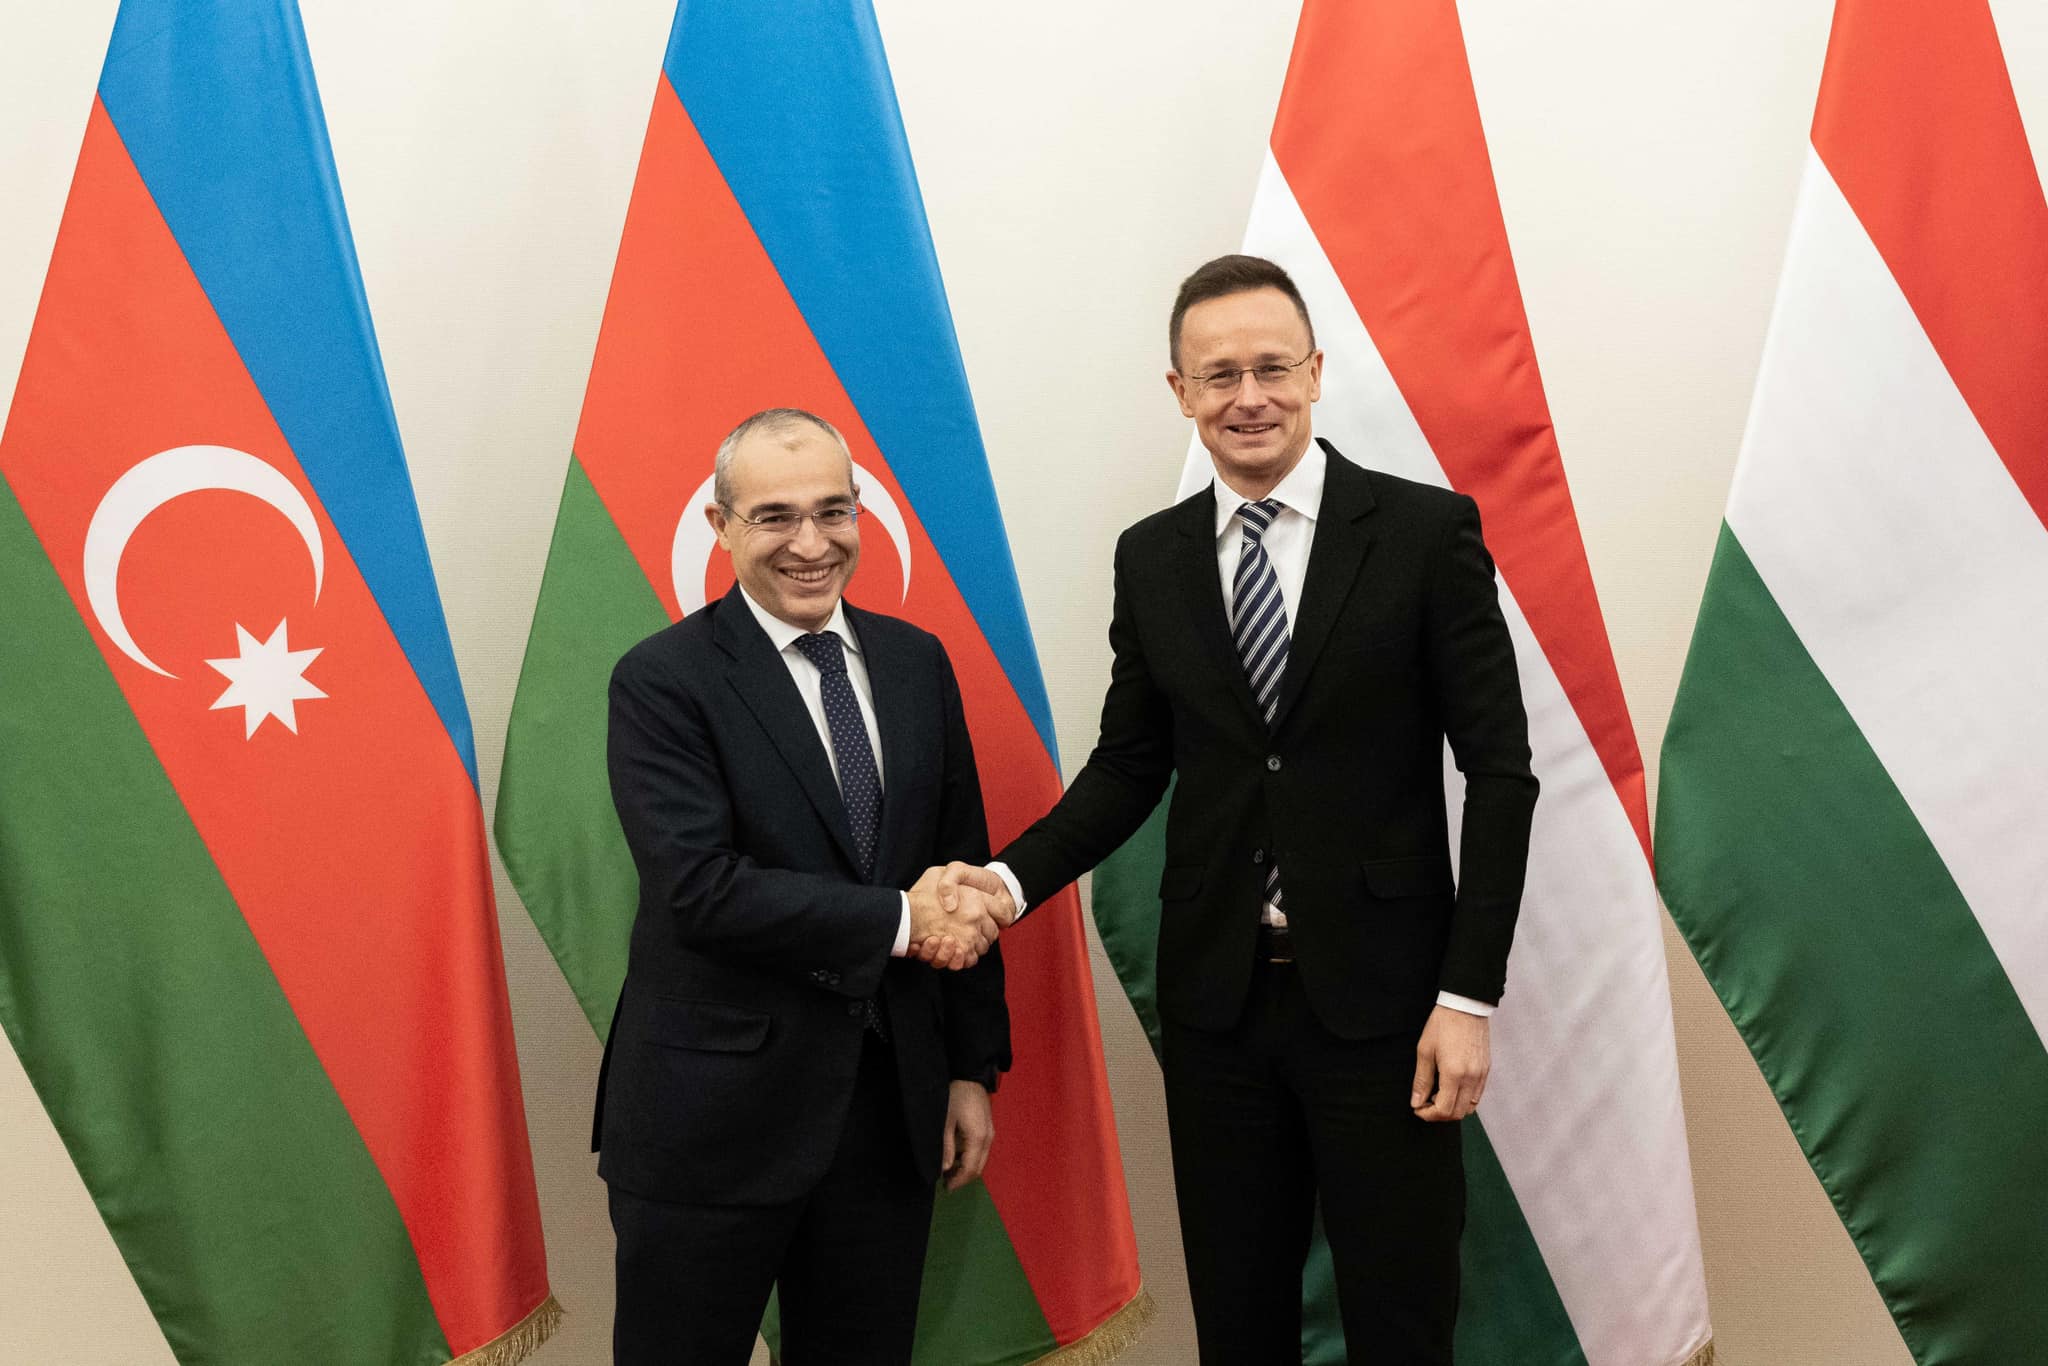 Azerbaijani Gas Will Play Important Role in Hungary's Energy Security